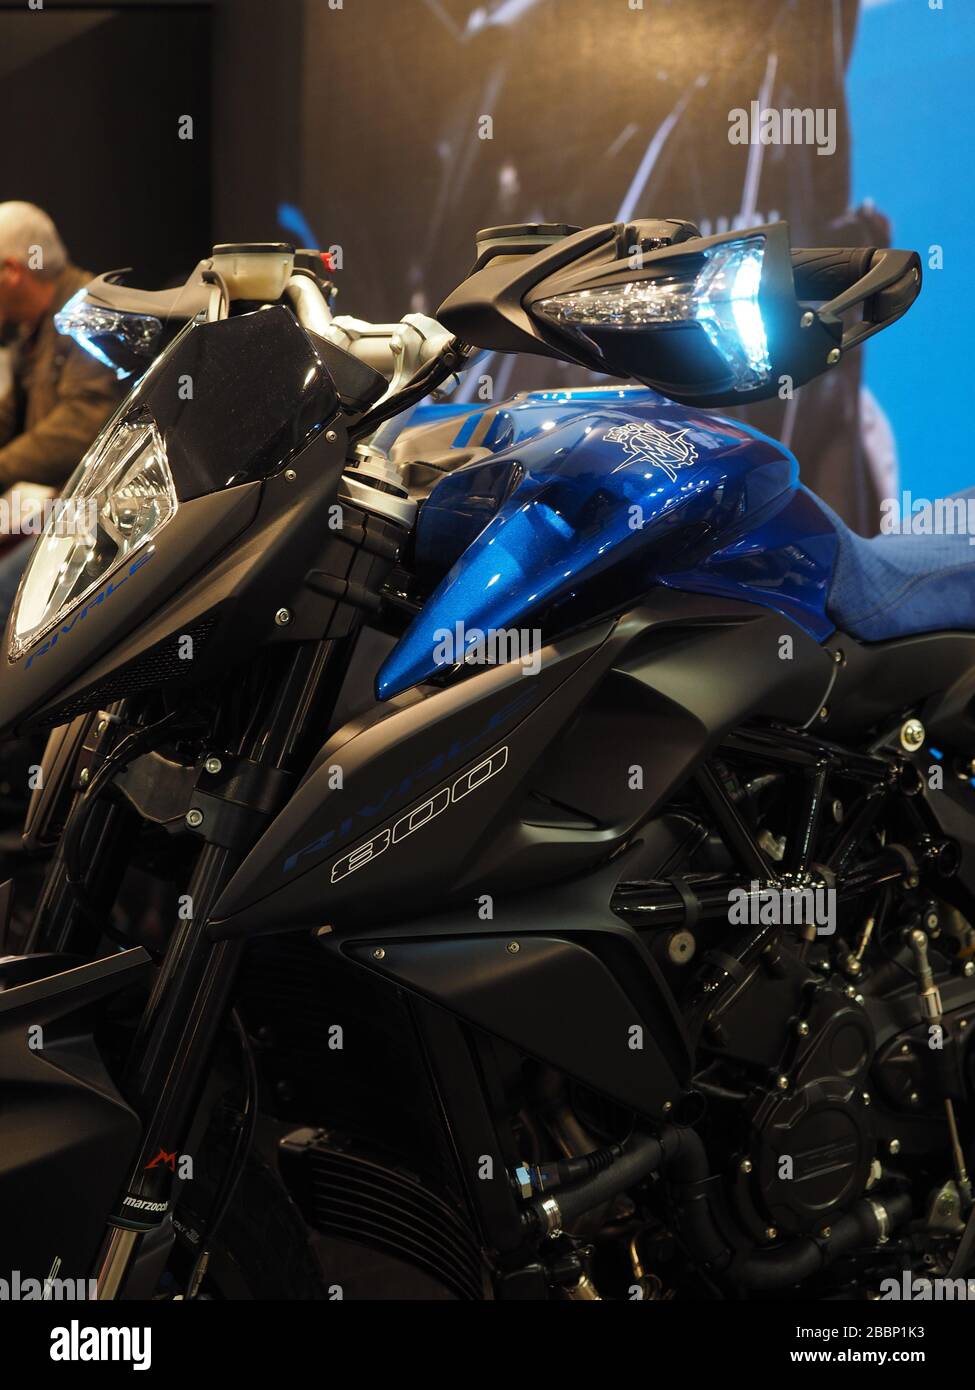 Salon international des motocyclettes EICMA, Fiera Milano, Rho, Milano, Lombardie, Italie, Europe Banque D'Images